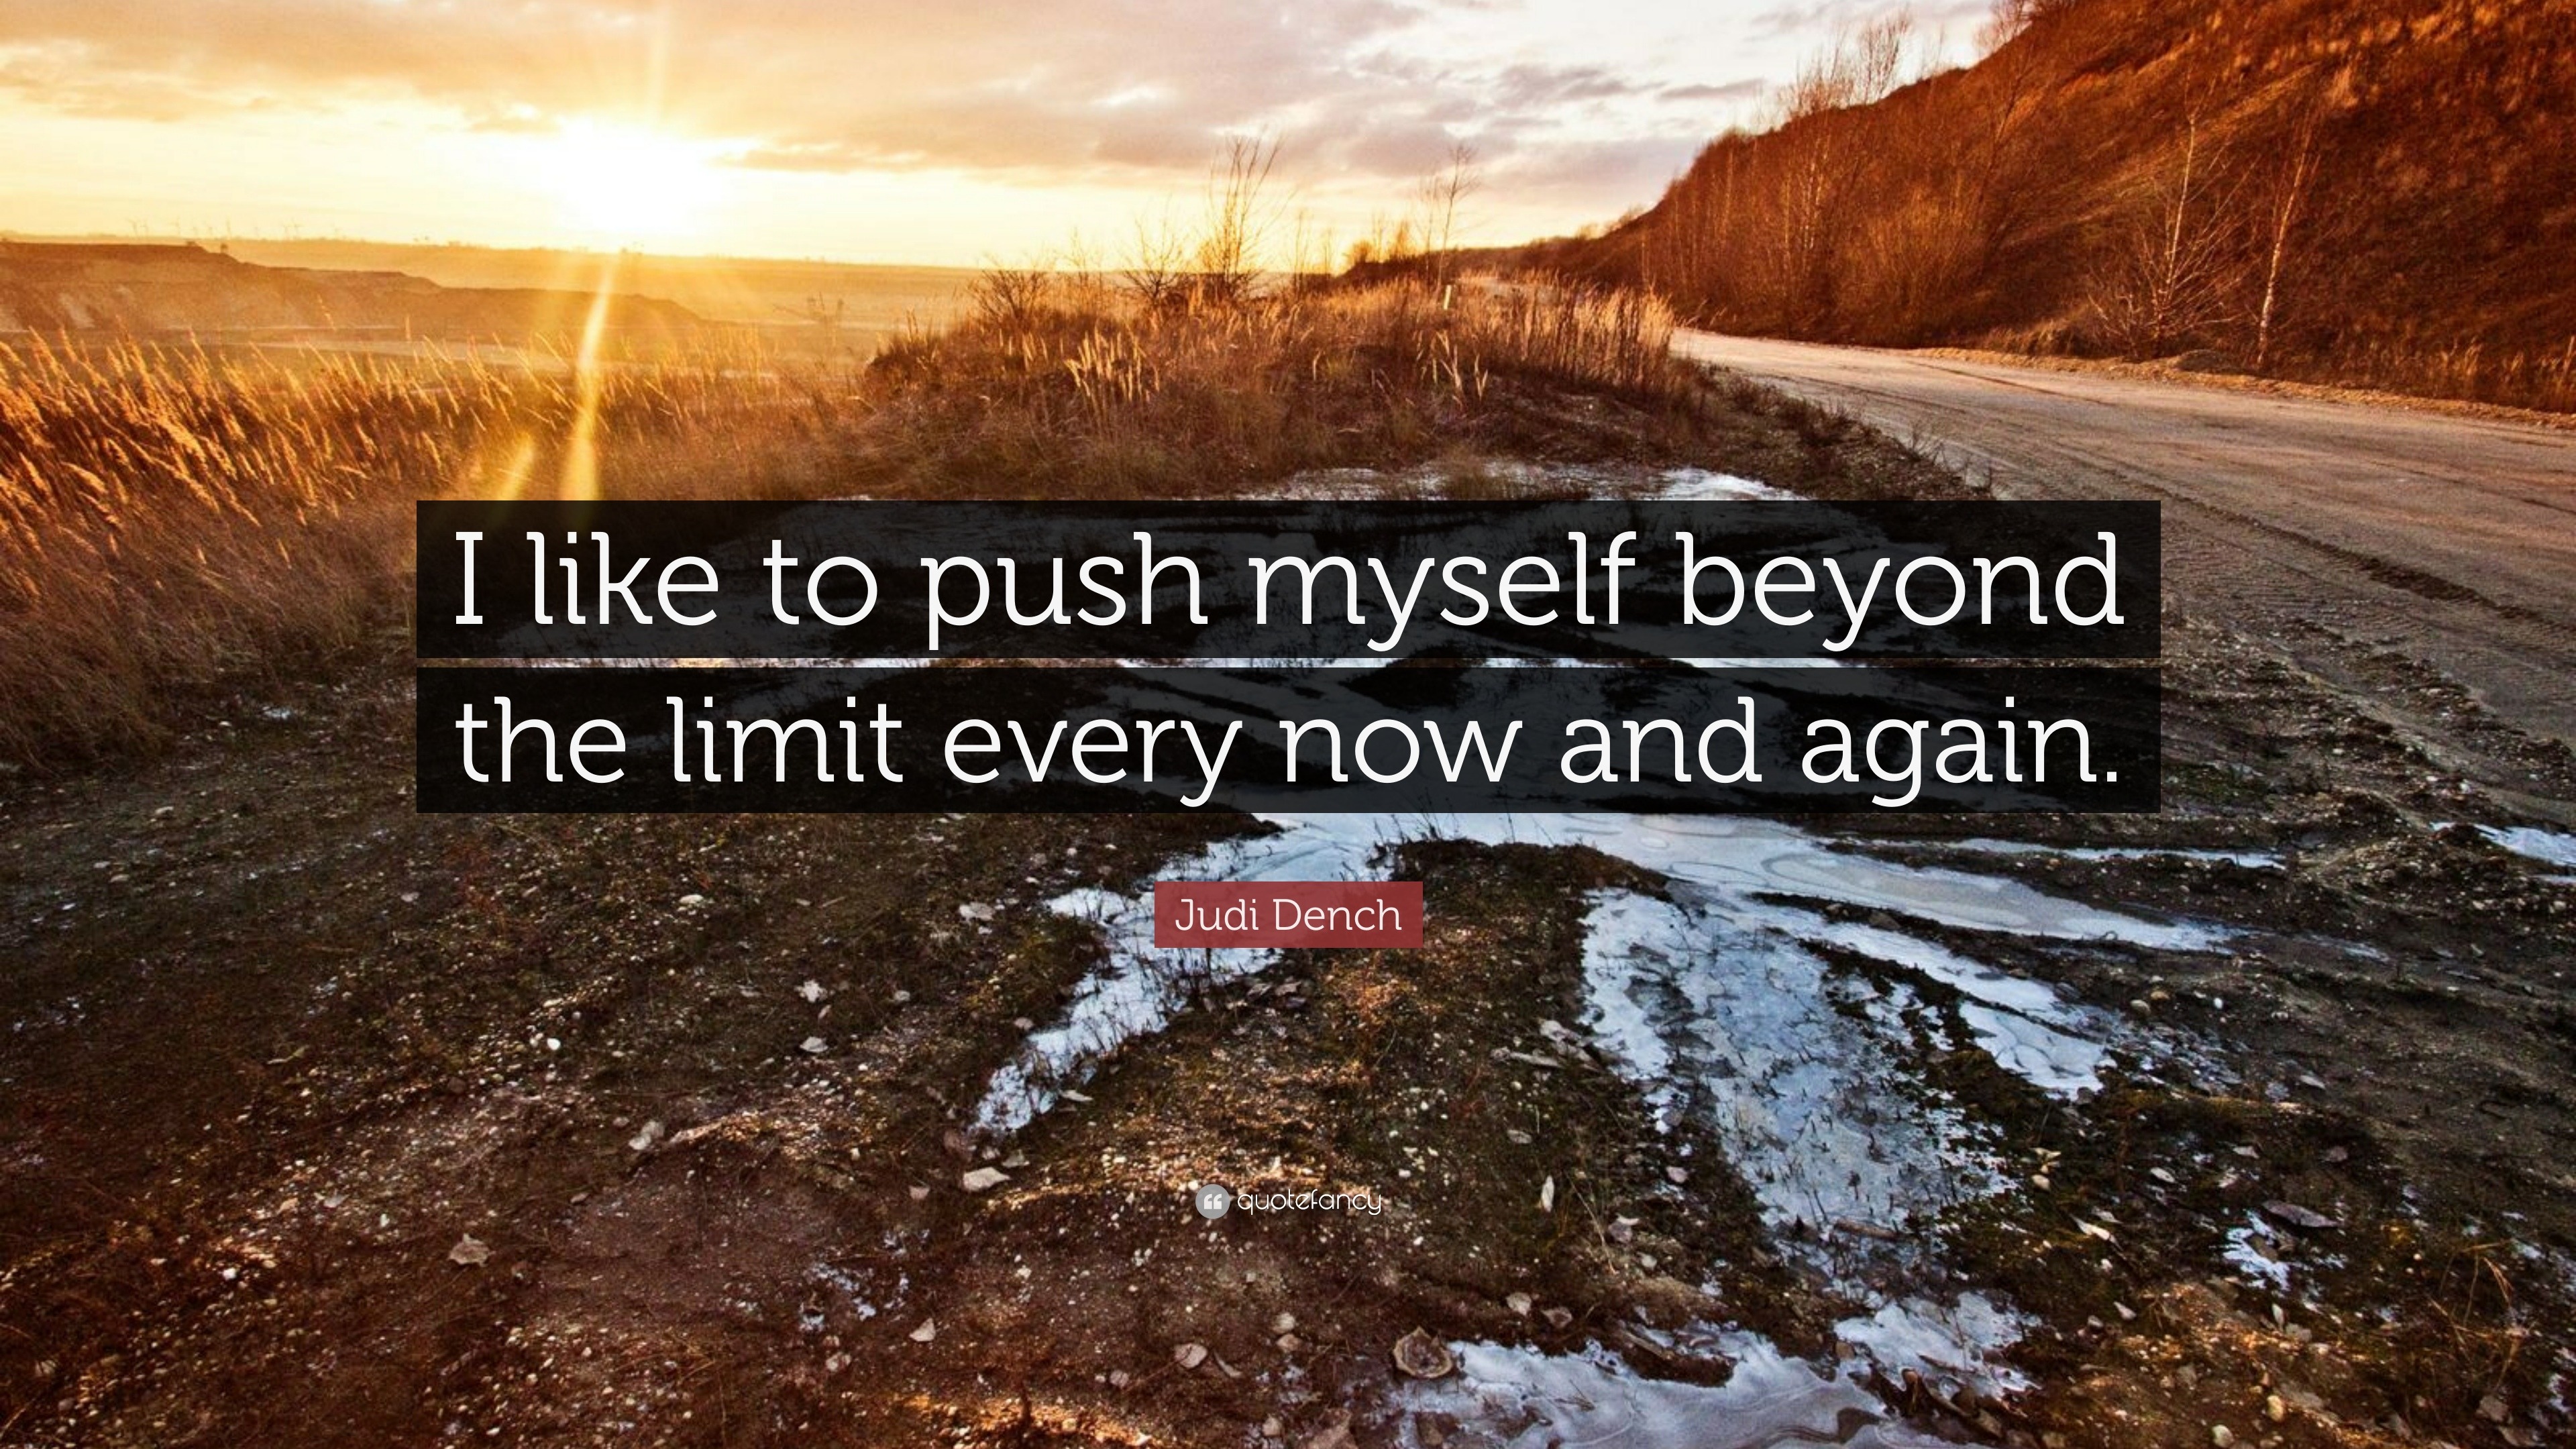 Judi Dench Quote: “I like to push myself beyond the limit every now and  again.”